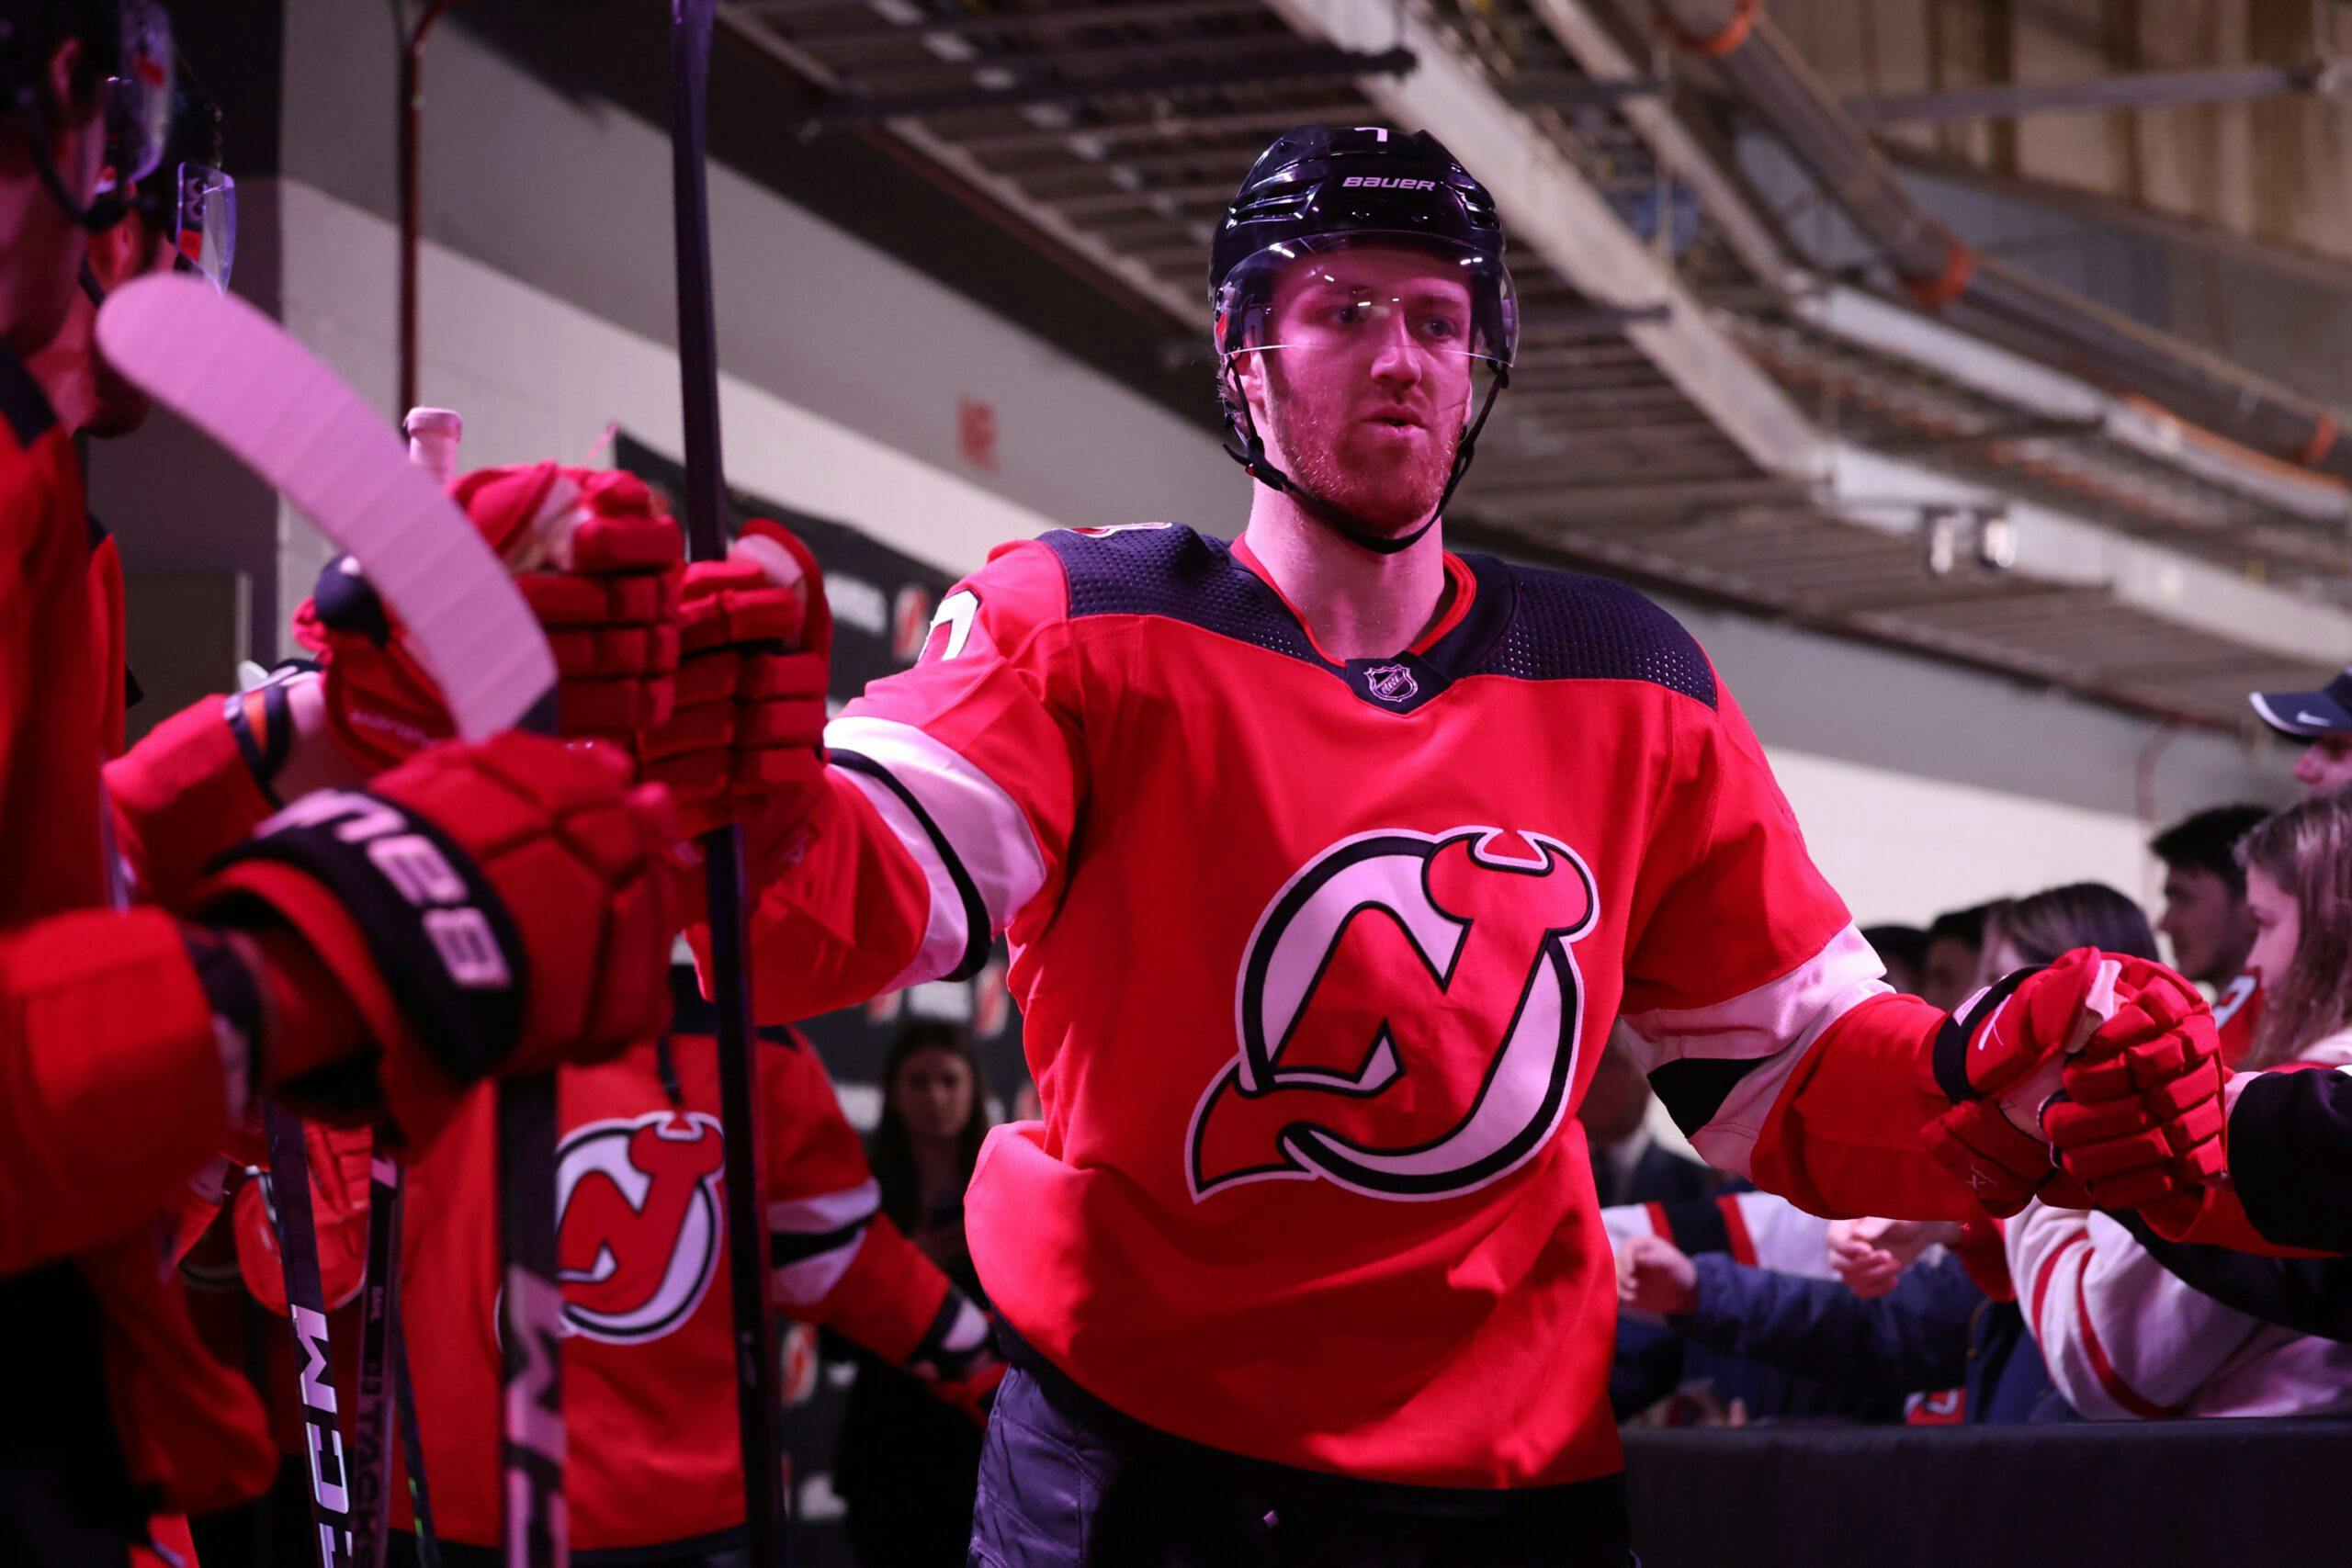 New Jersey Devils place Dougie Hamilton on injured reserve with torn pectoral muscle